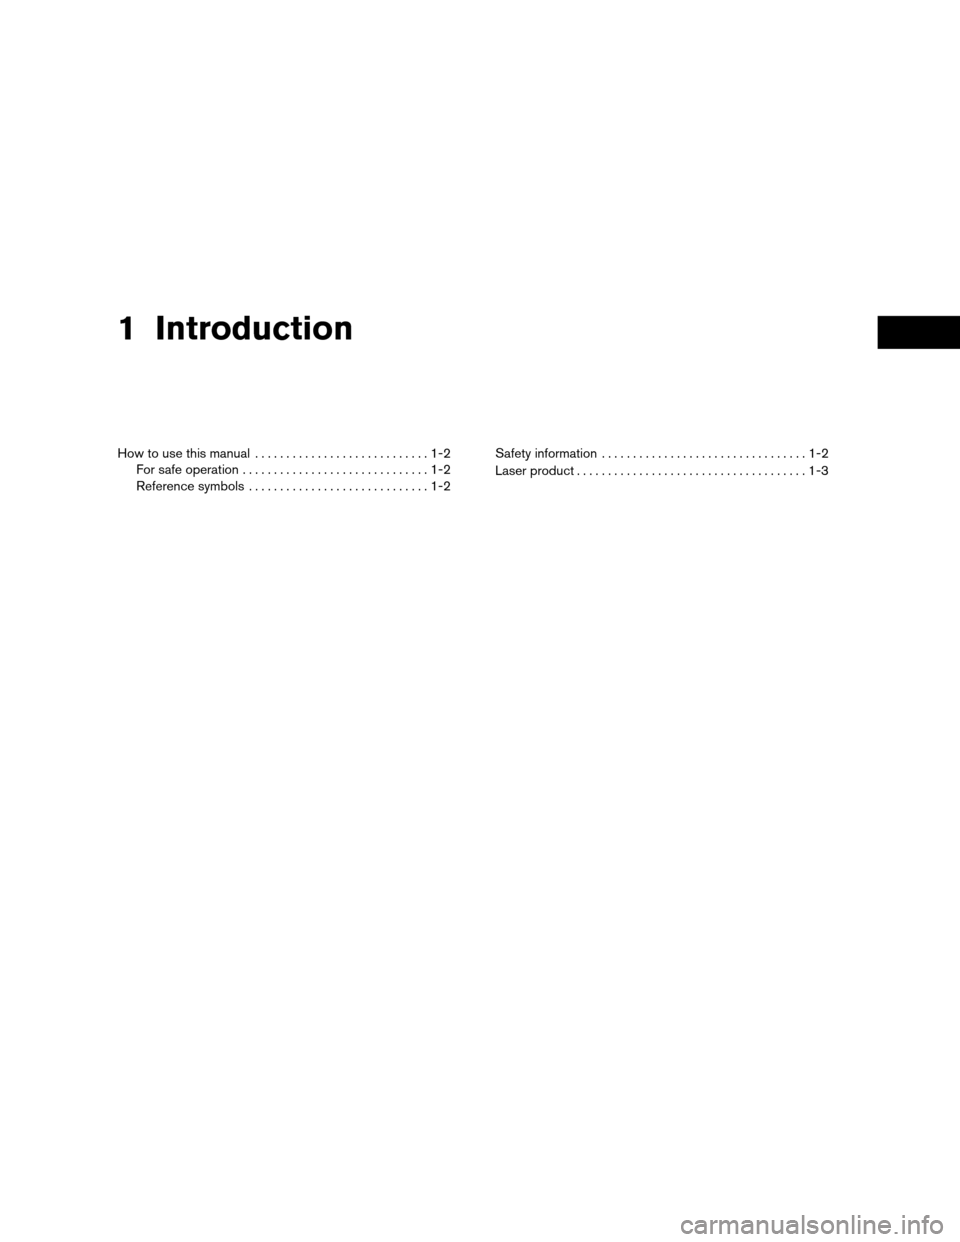 NISSAN CUBE 2011 3.G LC Navigation Manual 1 Introduction
How to use this manual............................1-2
For safe operation ..............................1-2
Reference symbols .............................1-2 Safety information
........